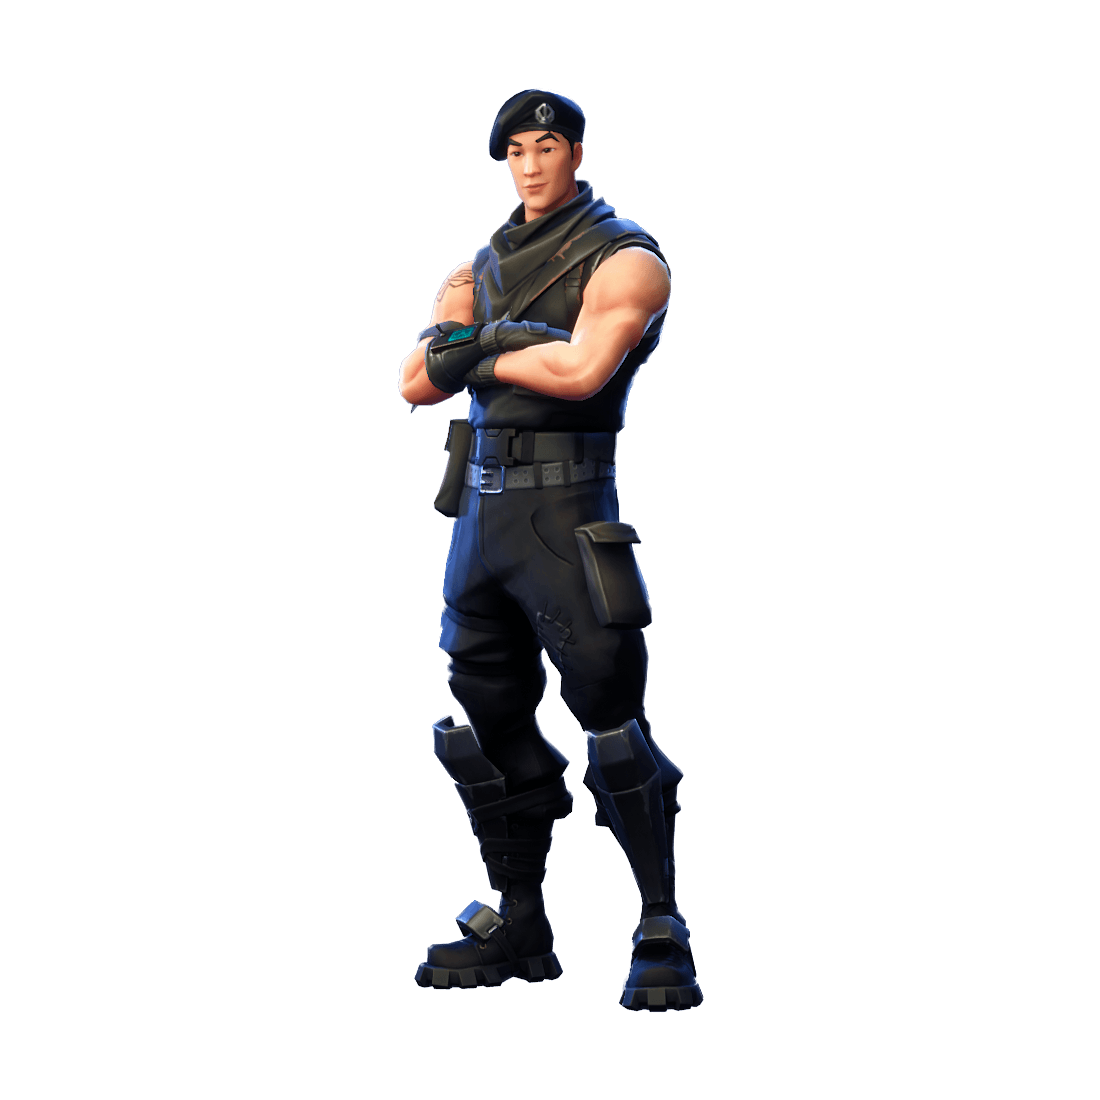 Special Forces Fortnite Outfit Skin How to Get + Info.